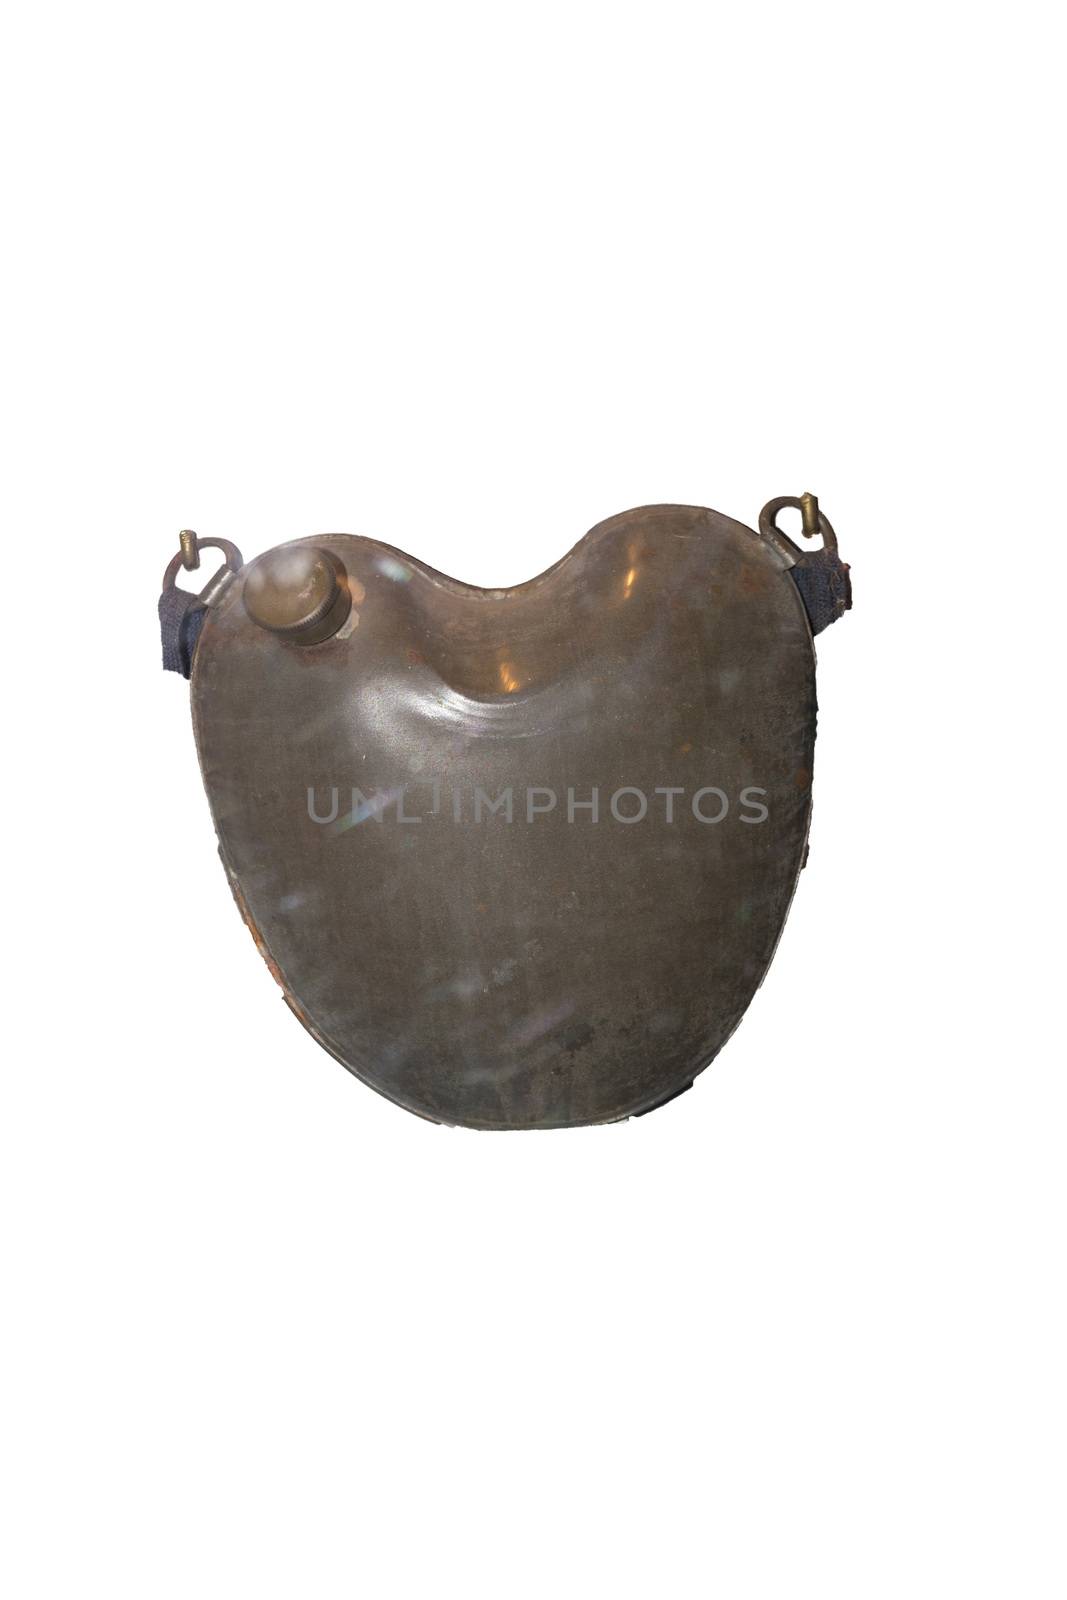 Old-fashioned hot water bottle of metal by JFsPic